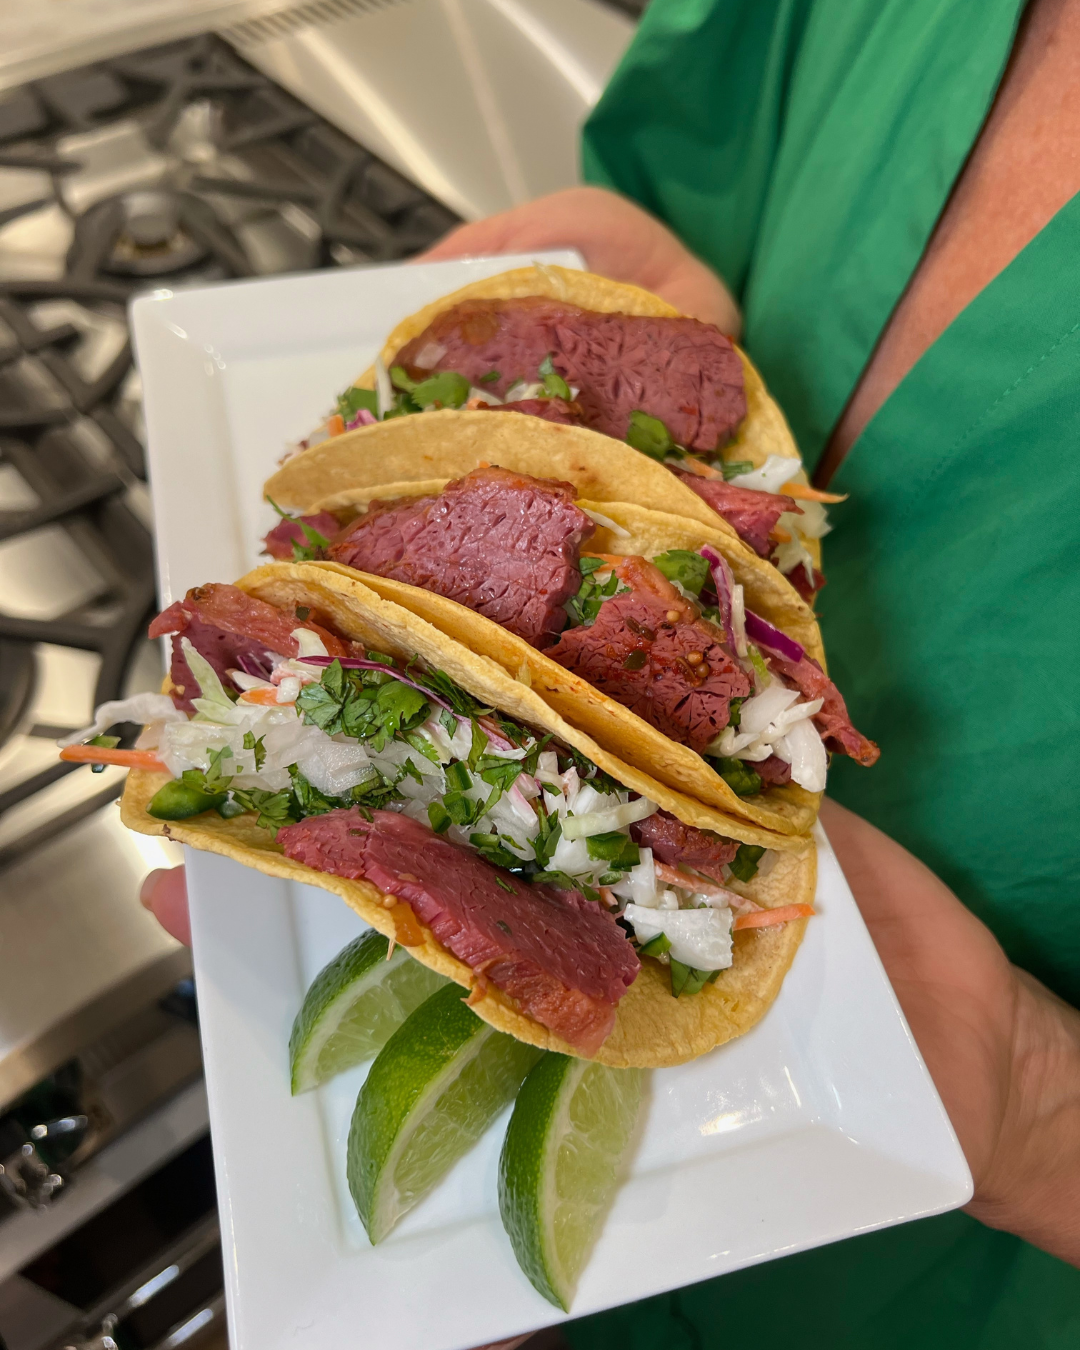 Stout Braised Corned Beef Tacos with Spicy Cabbage Slaw

beef tacos, lunch, dinner, recipe, beef tacos, taco recipes, spicy cabbage slaw, at-home recipes, cook at home